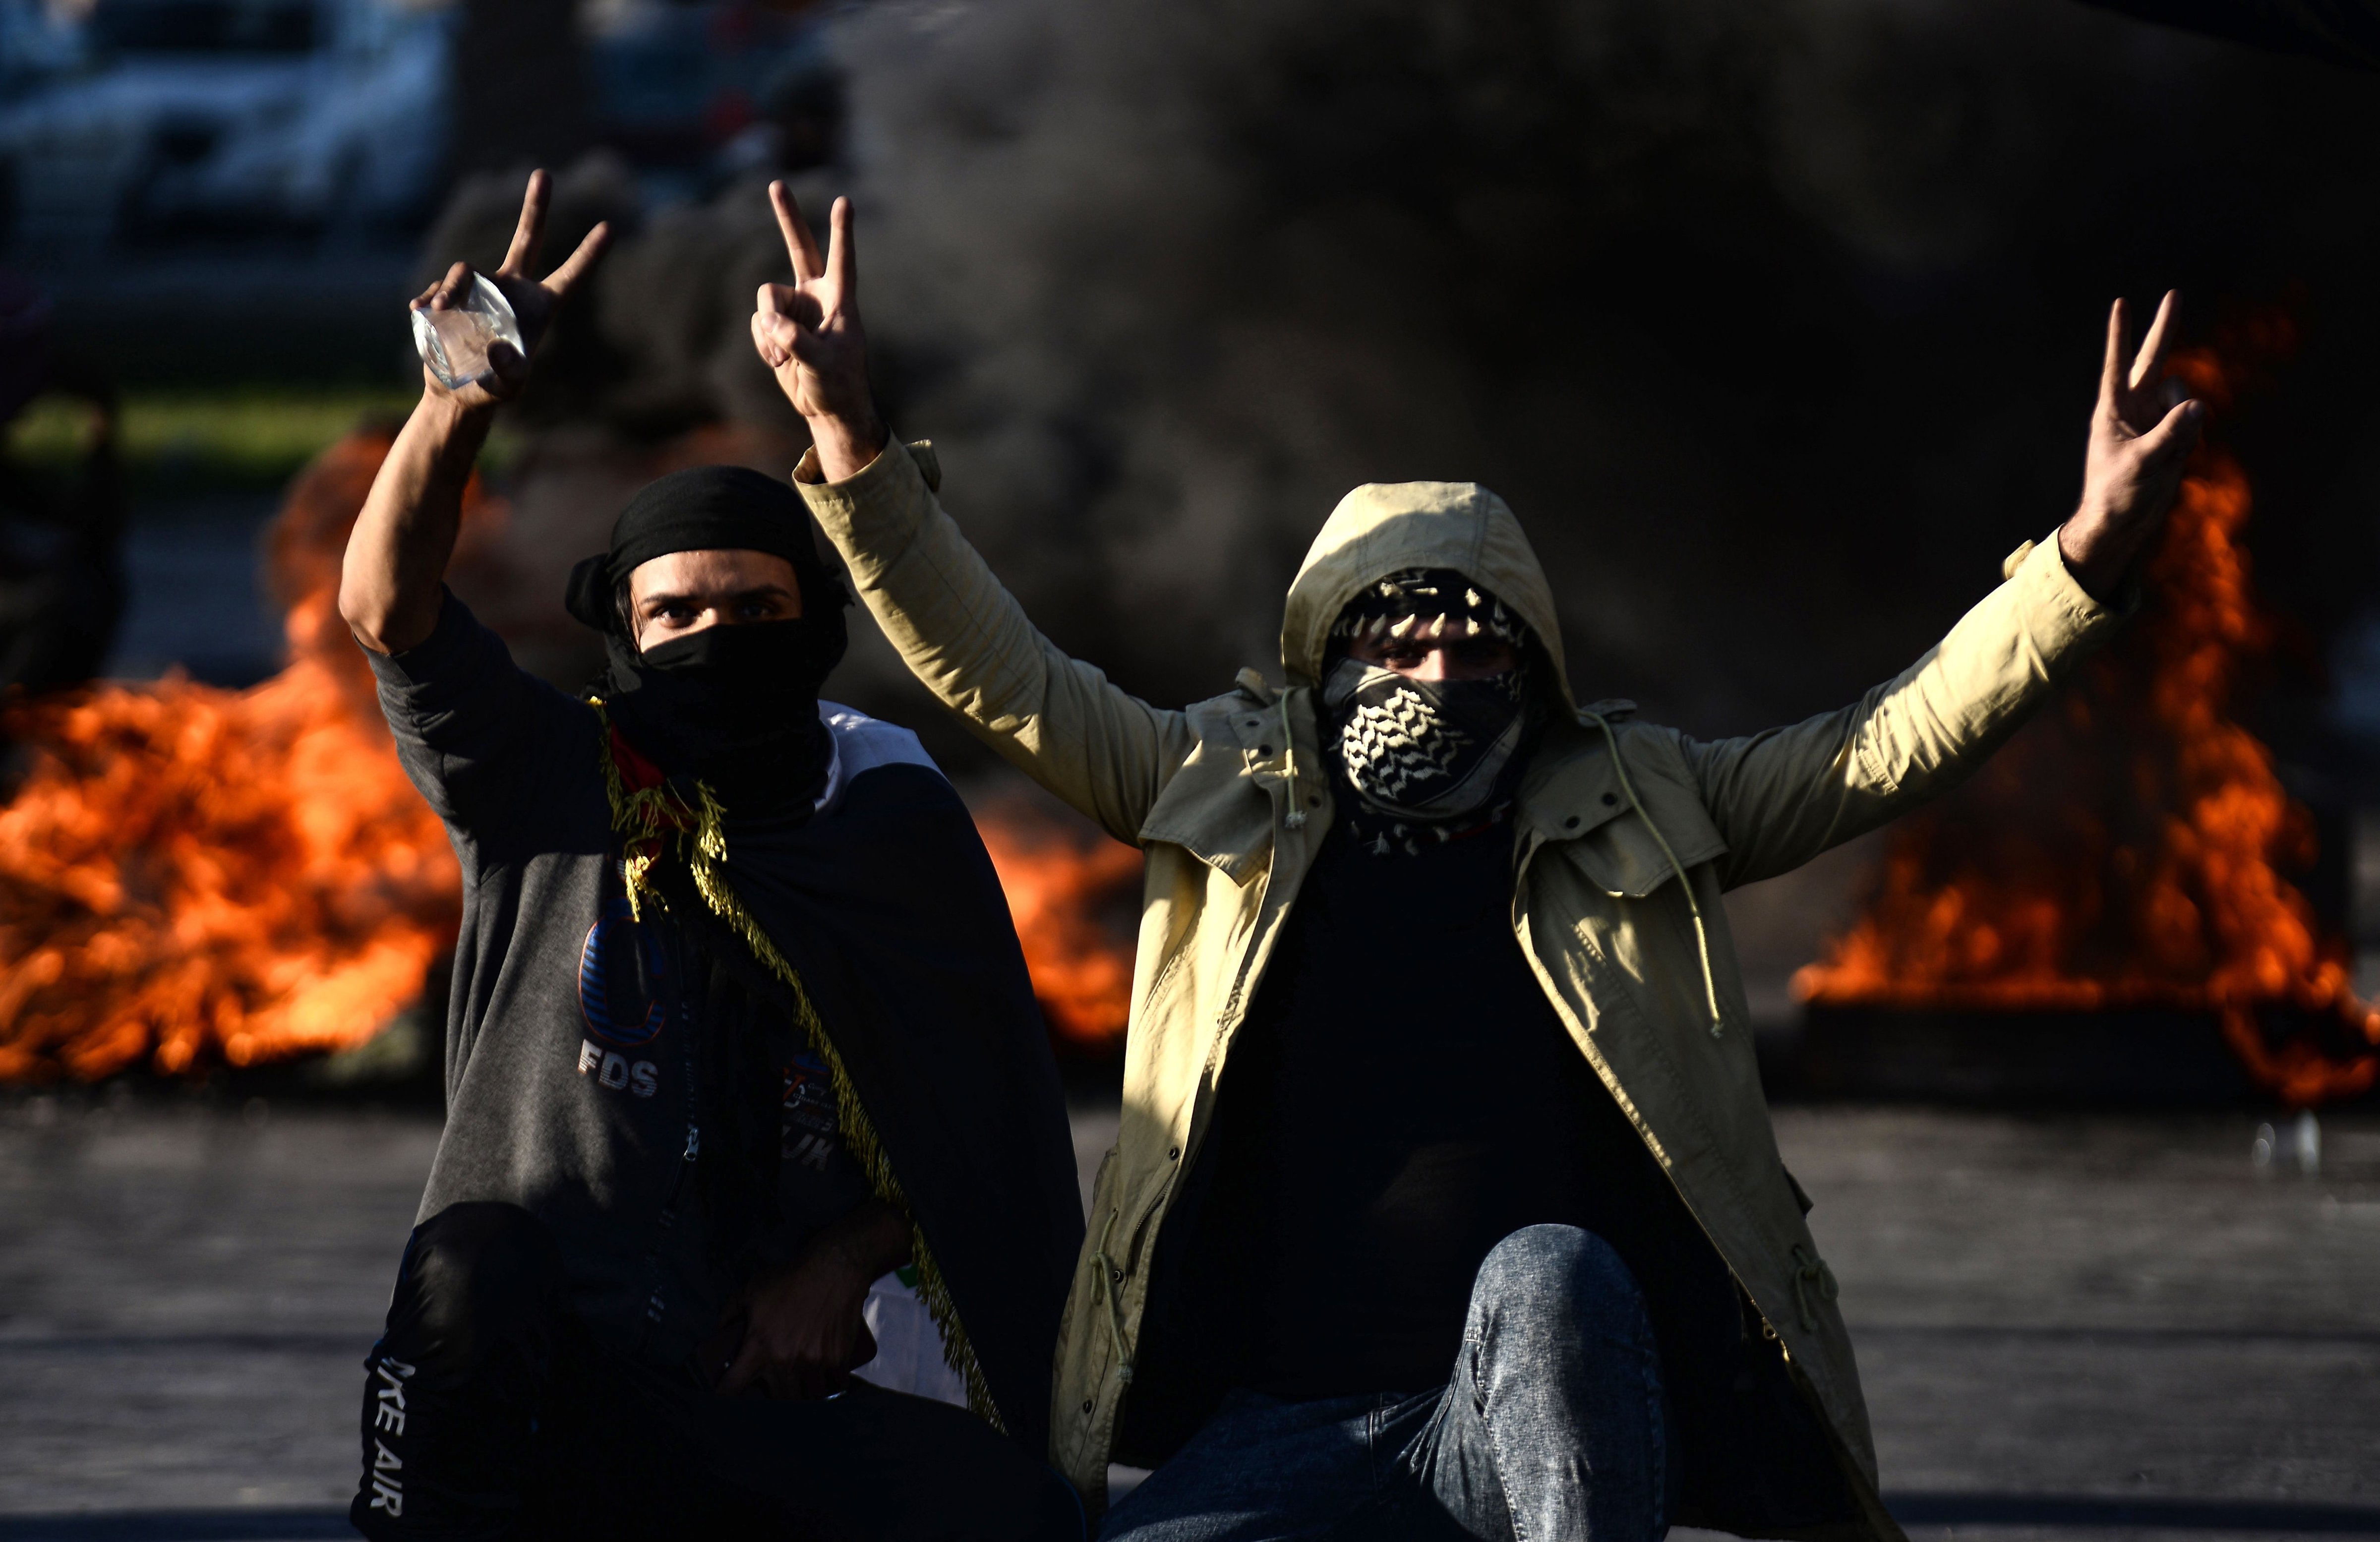 Iraqi demonstrators flash the victory sign next to burning tyres as angry protesters blocked roads in the central shrine city of Najaf, on Jan. 5, 2020 (Haidar Hamdani—AFP via Getty Images)